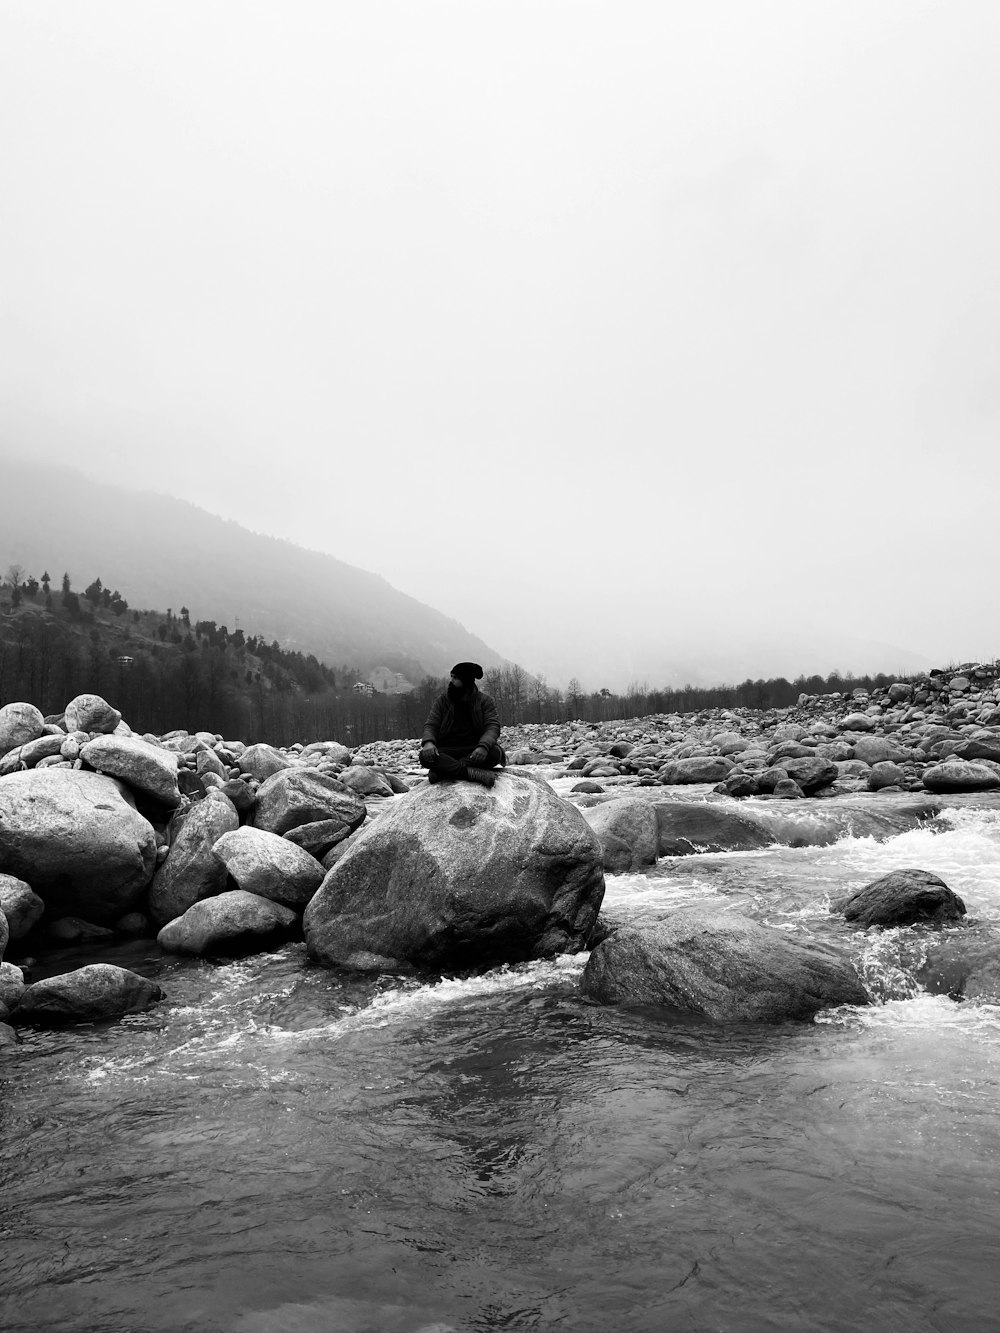 a person sitting on a rock in a river